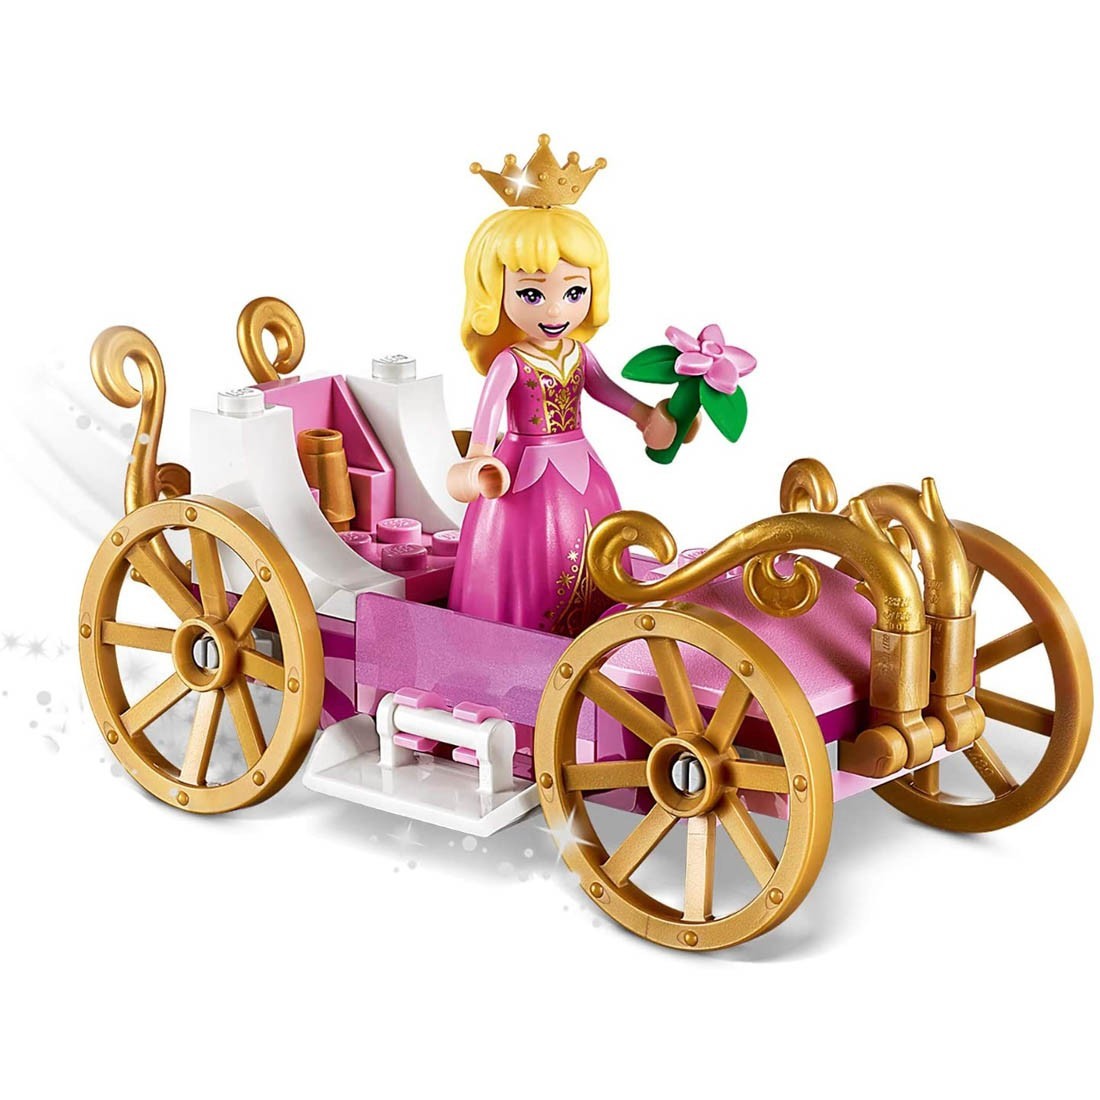 LEGO Disney Princess Aurora's Royal Playset - LEGO, delivered to your home TheOutfit